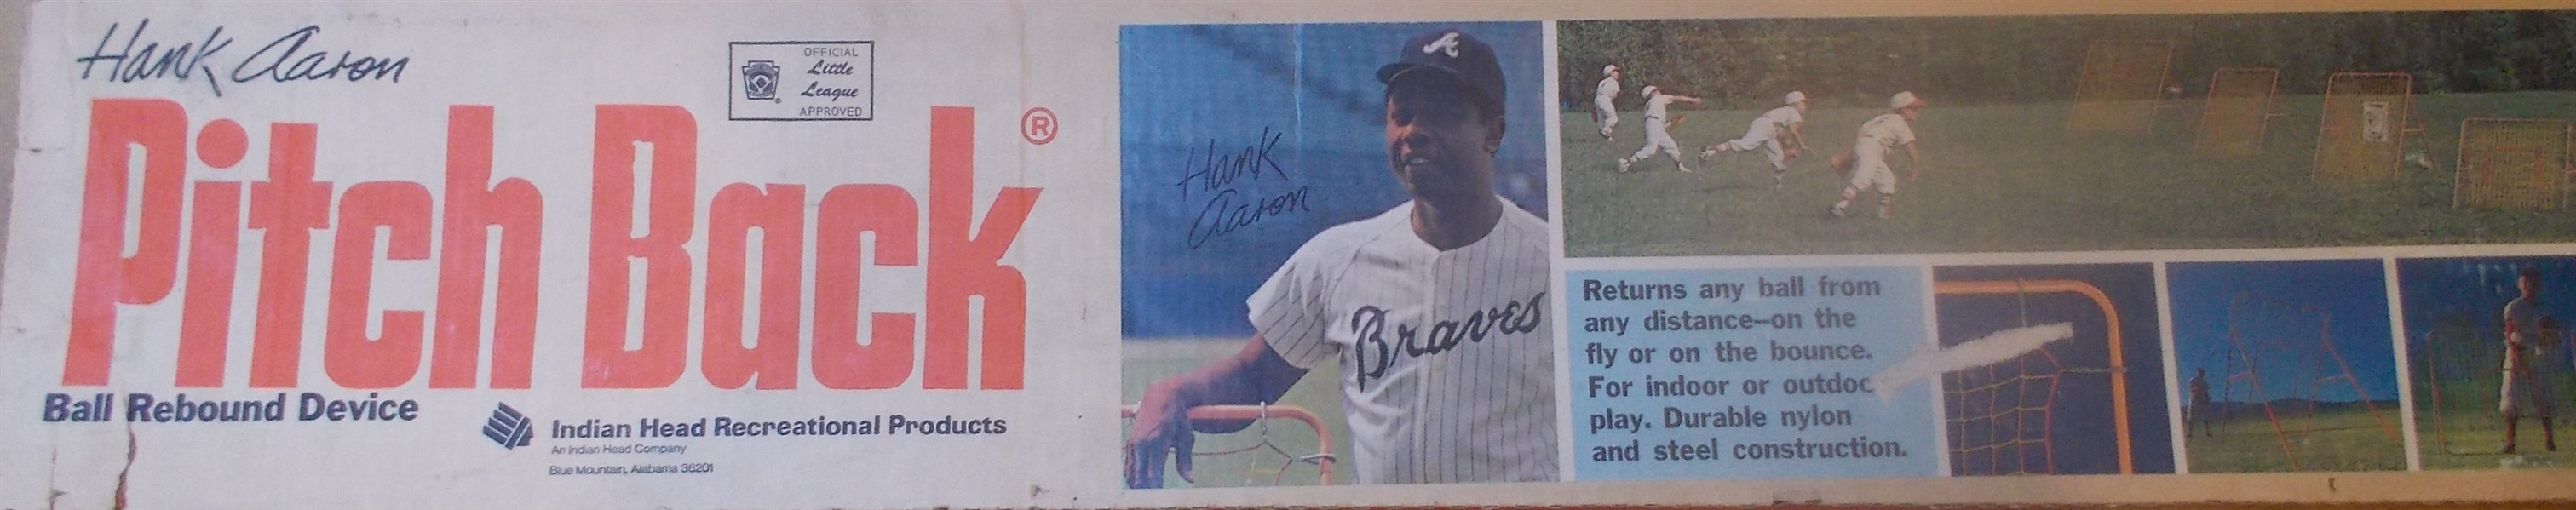 Hank Aaron 1970-71 Pitchback Pitching Device 